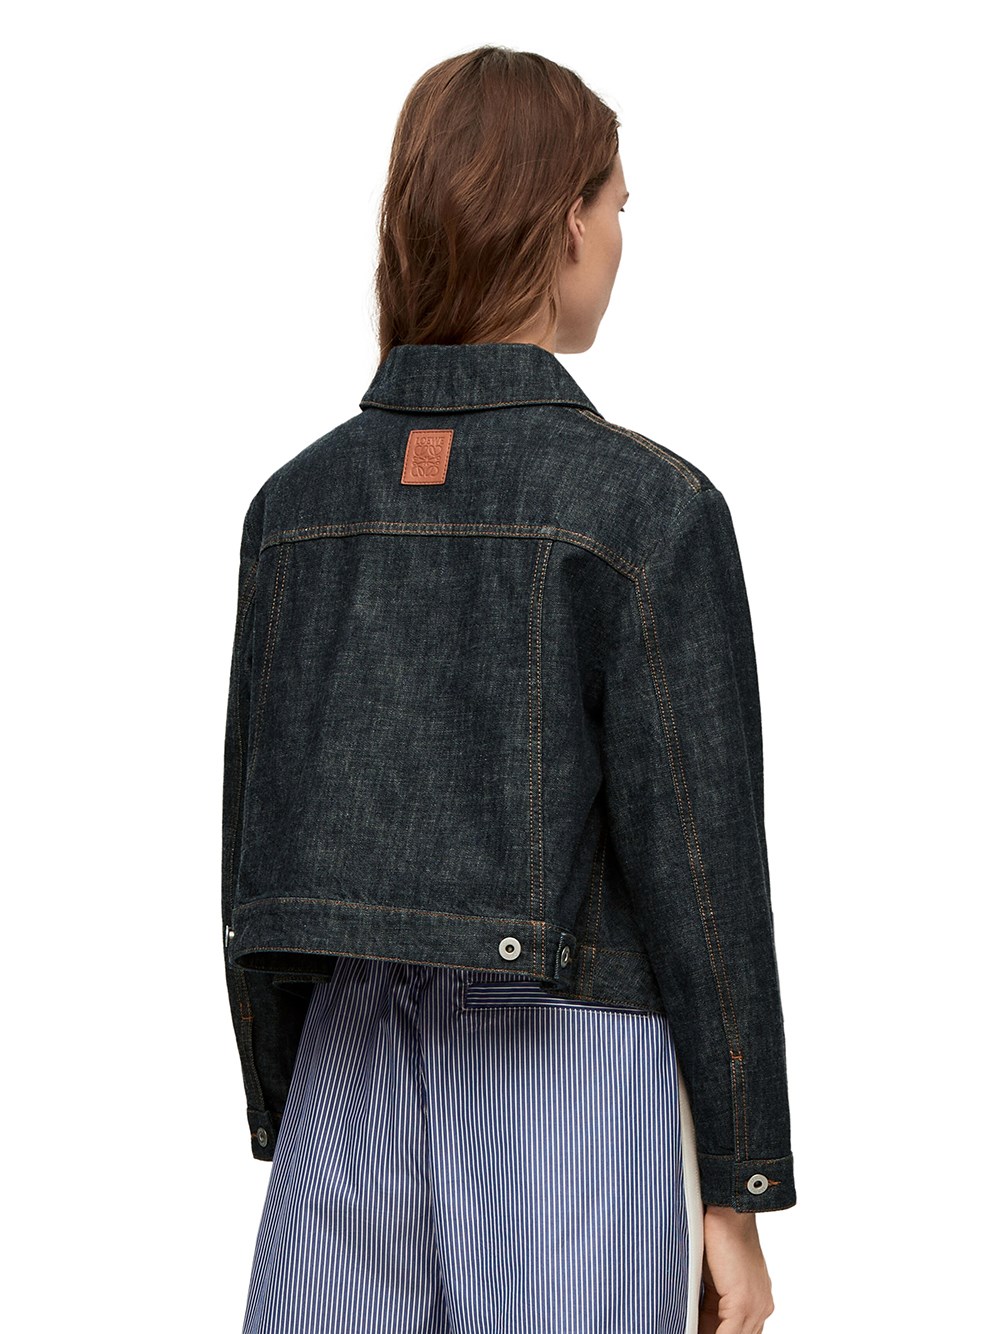 loewe TRAPEZE JACKET available on montiboutique.com - 54149